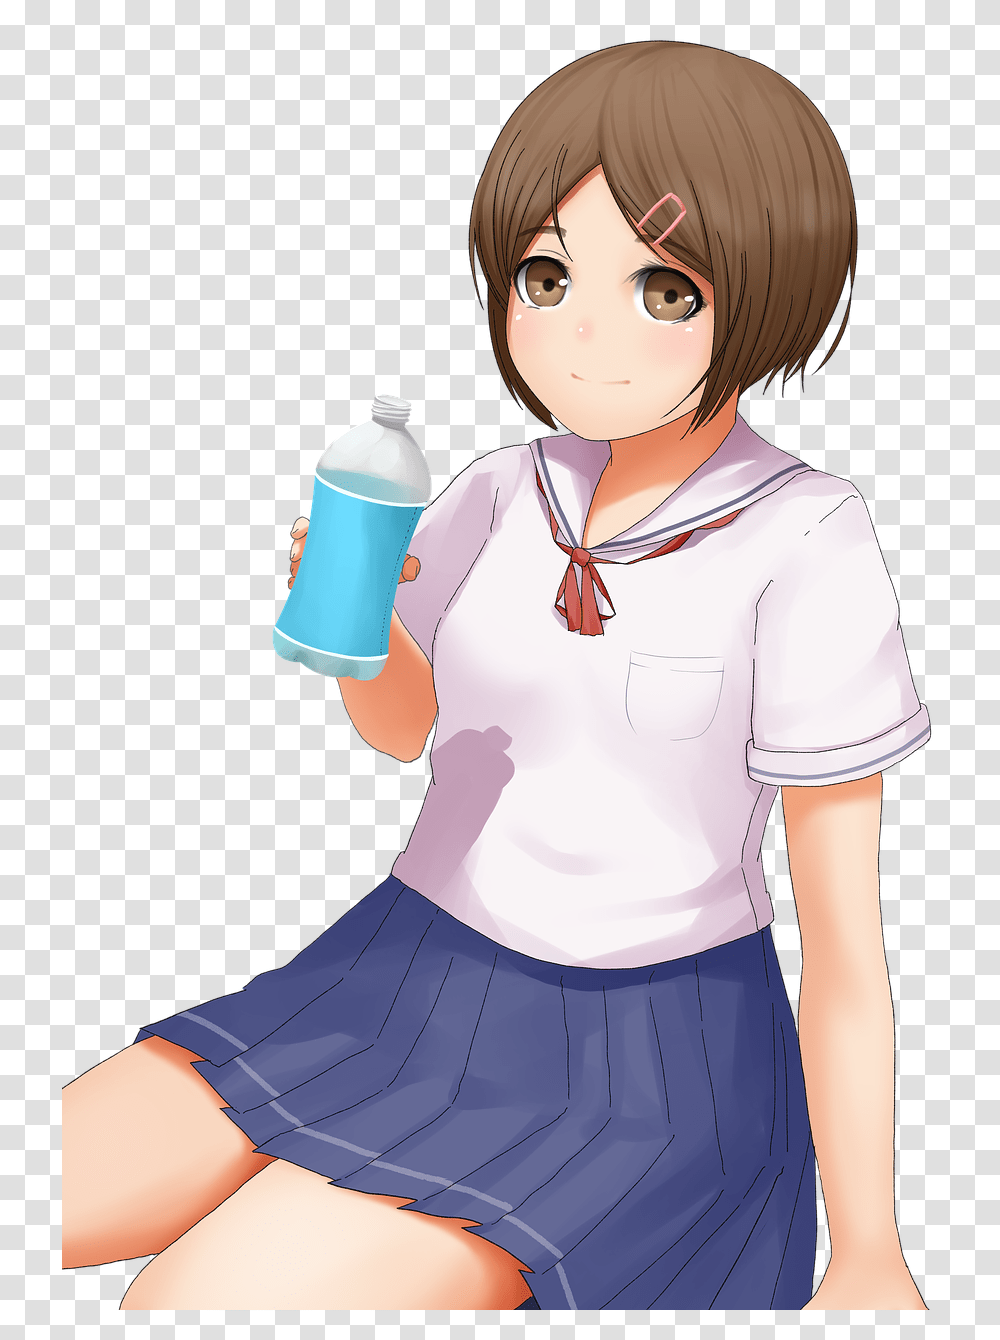 Moe Cute Free Image On Pixabay Cool Anime High School Girl, Person, Human, Nurse, Female Transparent Png